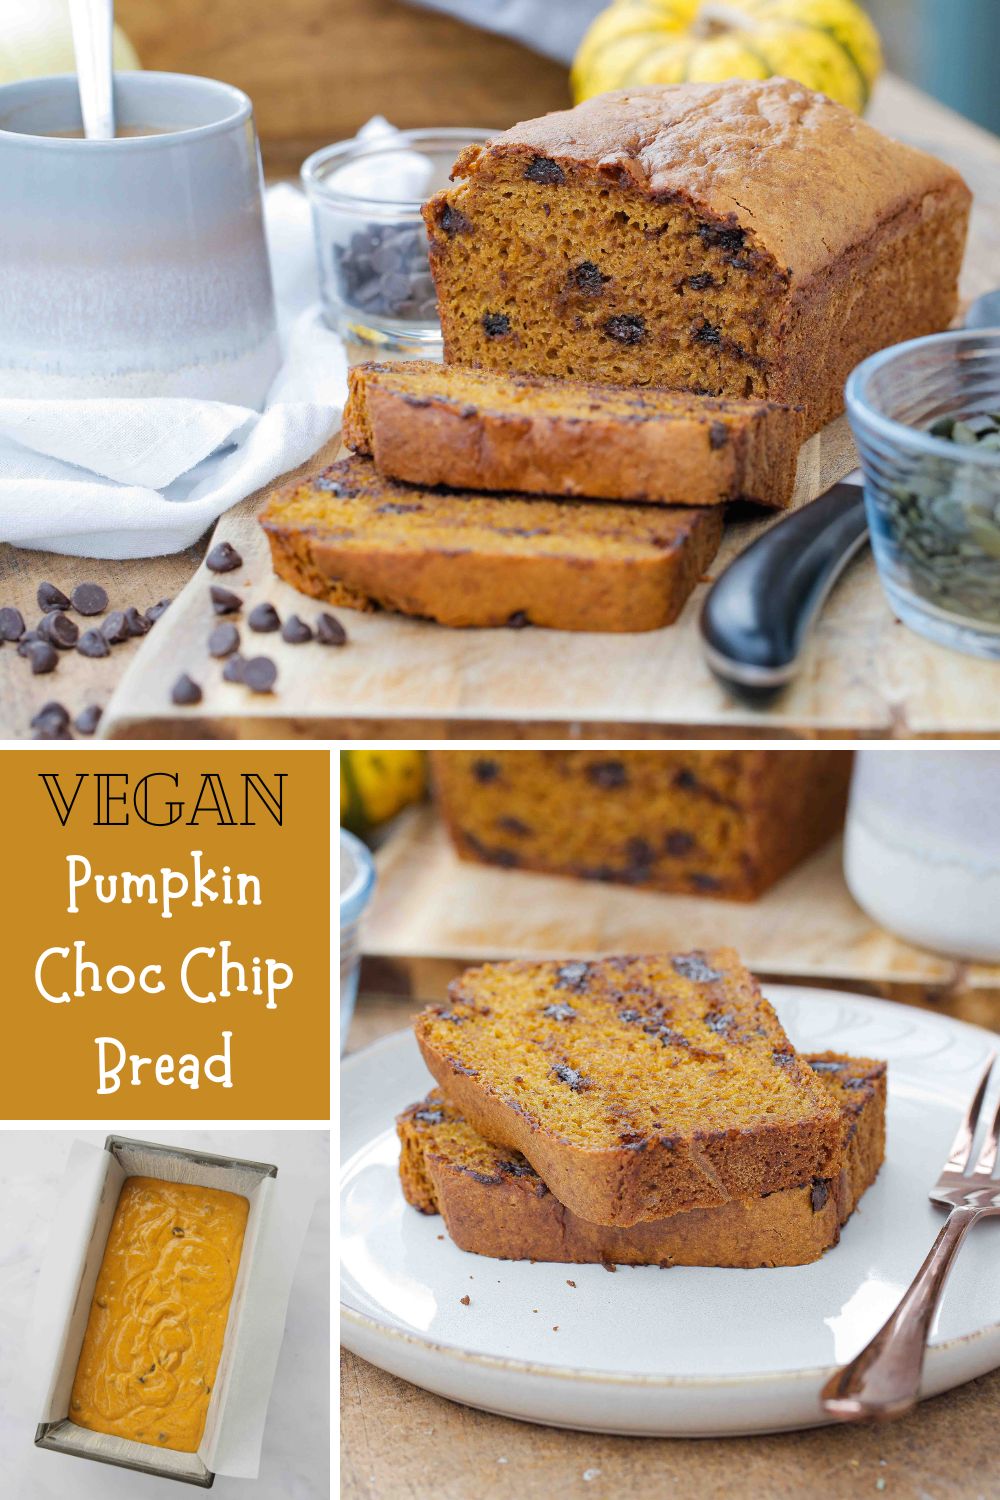 Embrace cosy autumn days with this lightly spiced, fluffy and divinely squidgy vegan pumpkin chocolate chip bread. A lovely autumn treat! Recipe on thecookandhim.com #pumpkinbread #pumpkincake #pumpkinpureerecipe #pumpkinrecipes #autumnrecipes #vegancakerecipe